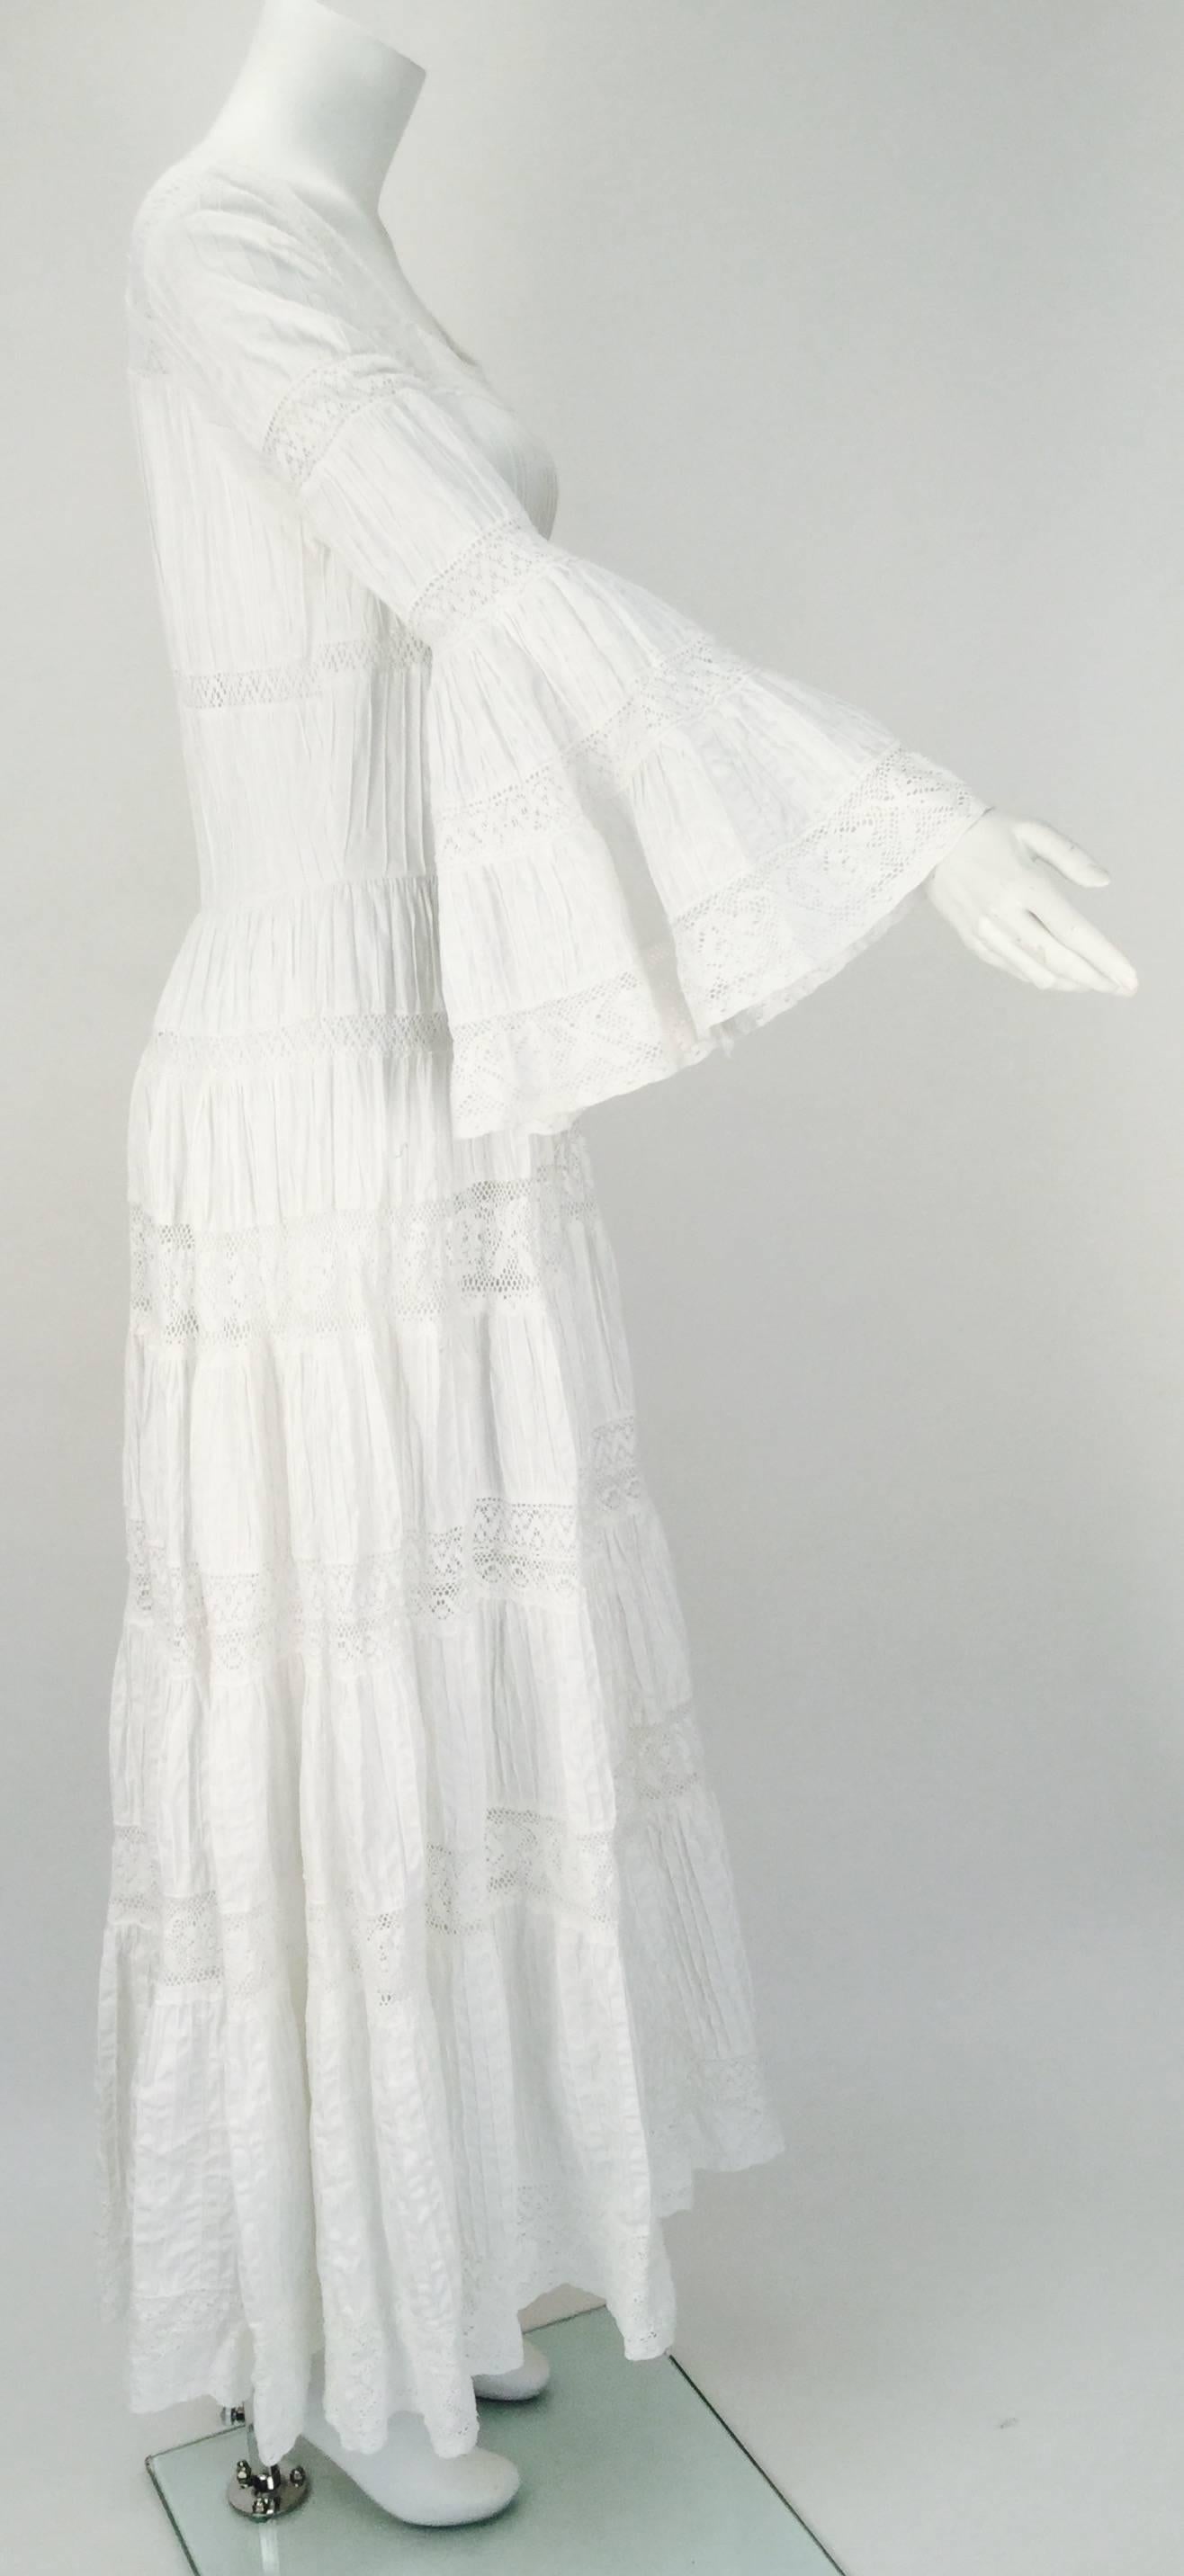 Perfect for a beach wedding or when you just want to channel some of your inner ethnic bohemian comes this 1970's white cotton dress with pintucking and crochet lace inserts. The dress was made in Mexico for Fred Leighton. Three quarter length